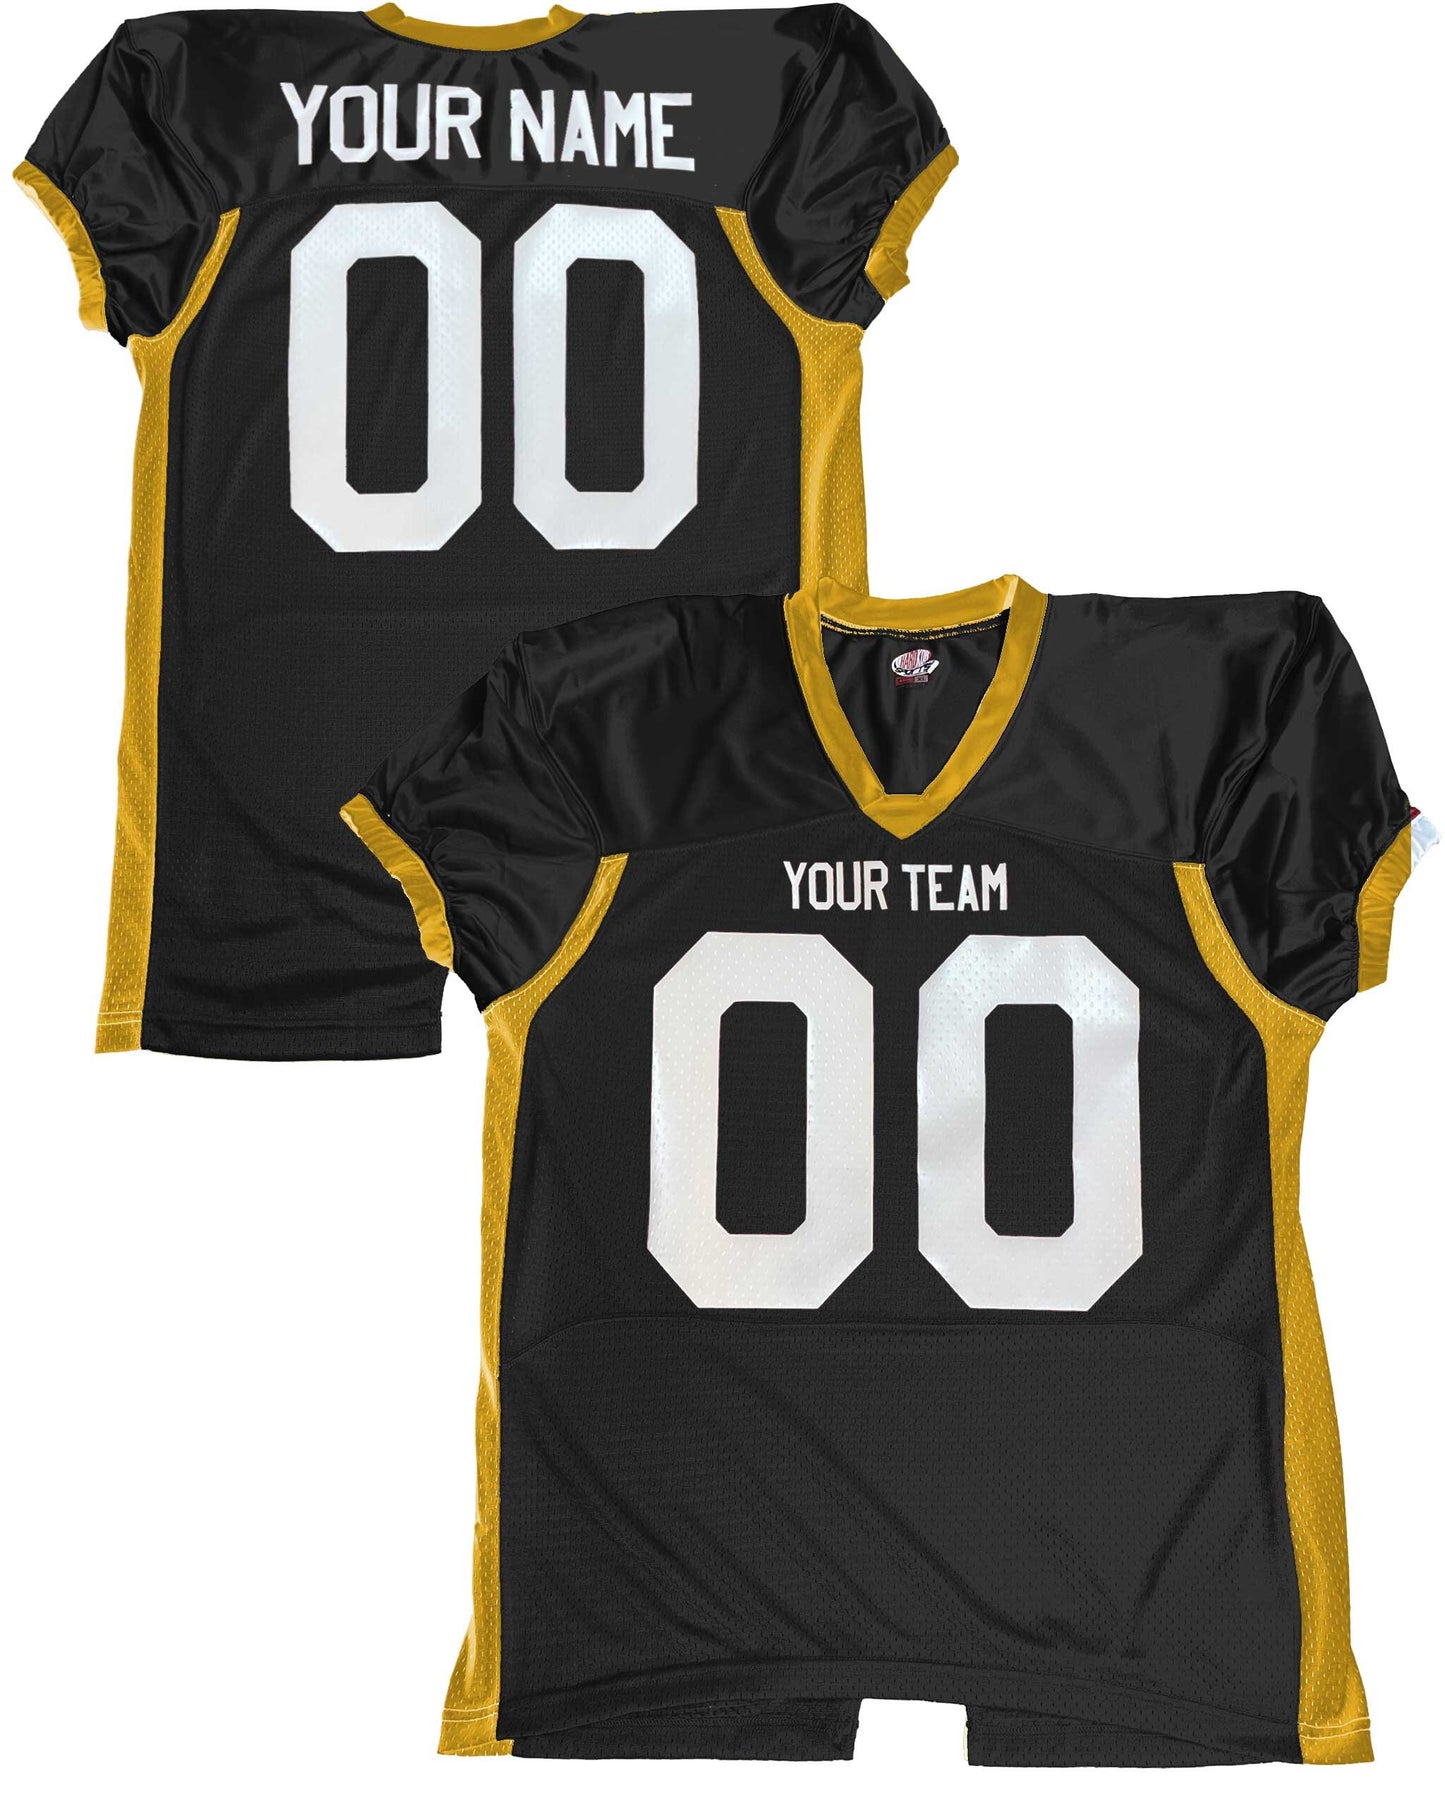 Fitted Professional Custom Color Football Jersey, Scarlet, Black, White & Gold, Stretch Mesh, Dazzle, Spandex, Customized for your team